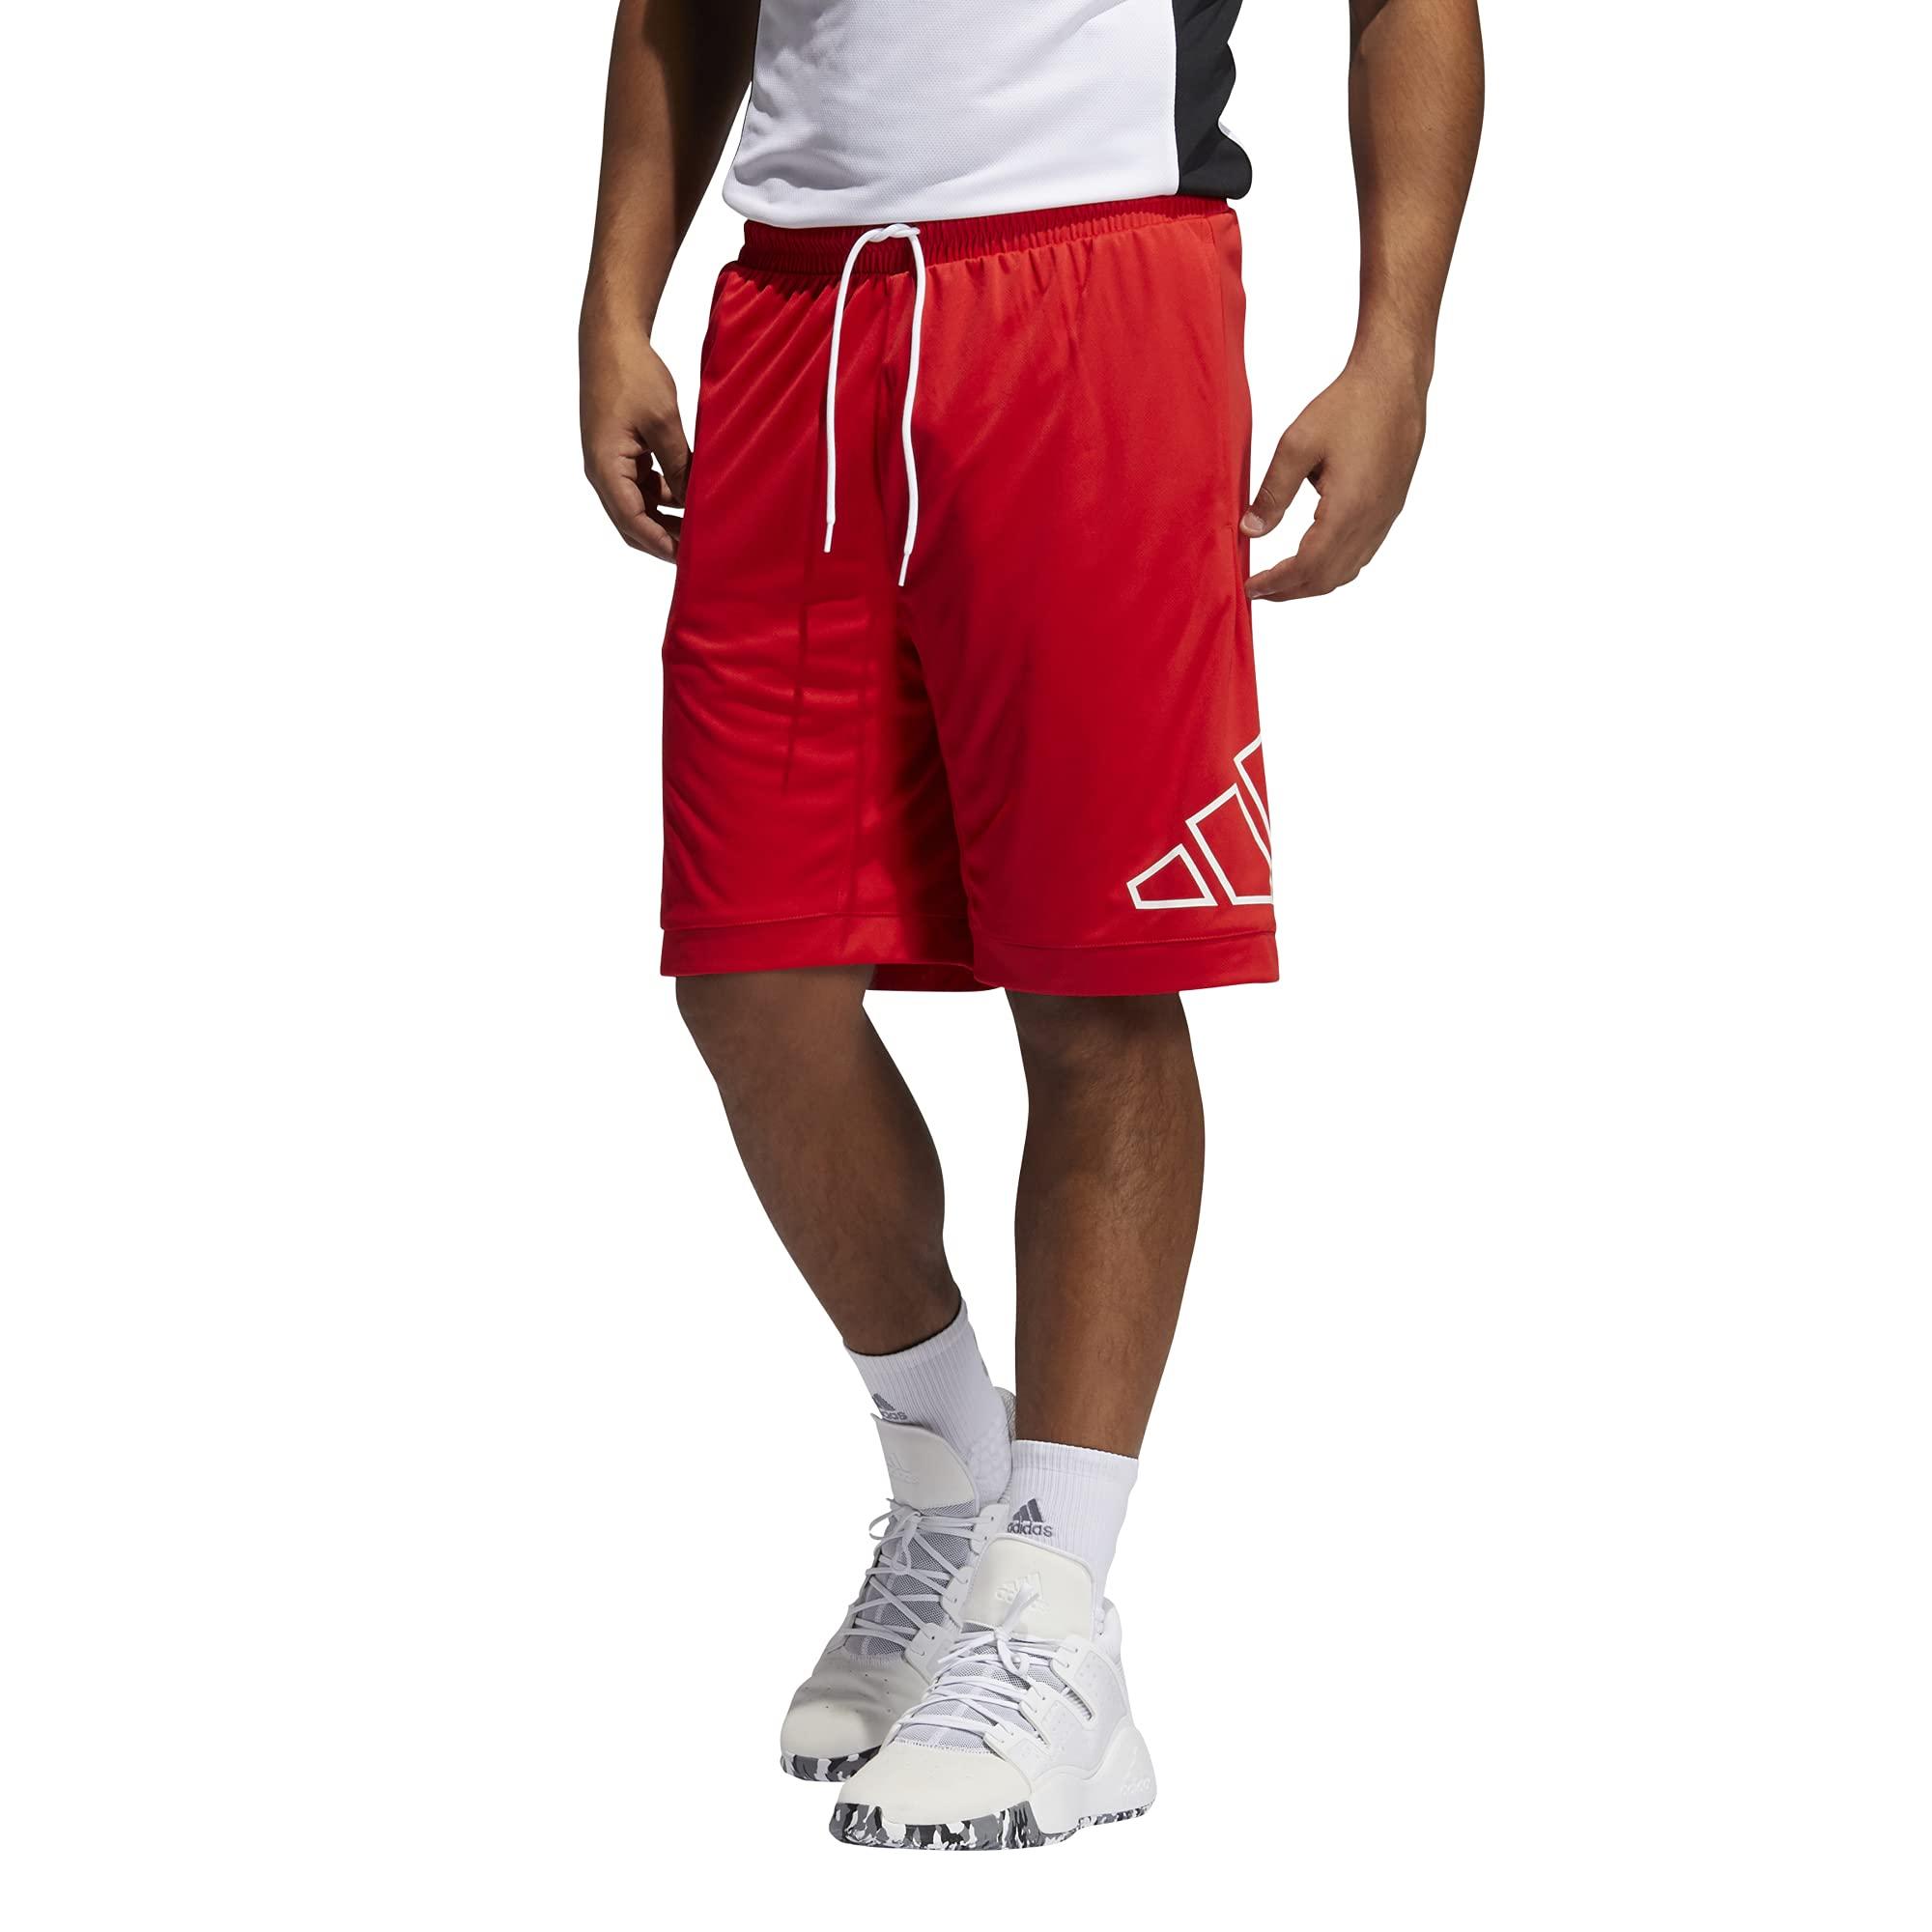 adidas Synthetic Big Logo Basketball Shorts in Vivid Red (Red) for 